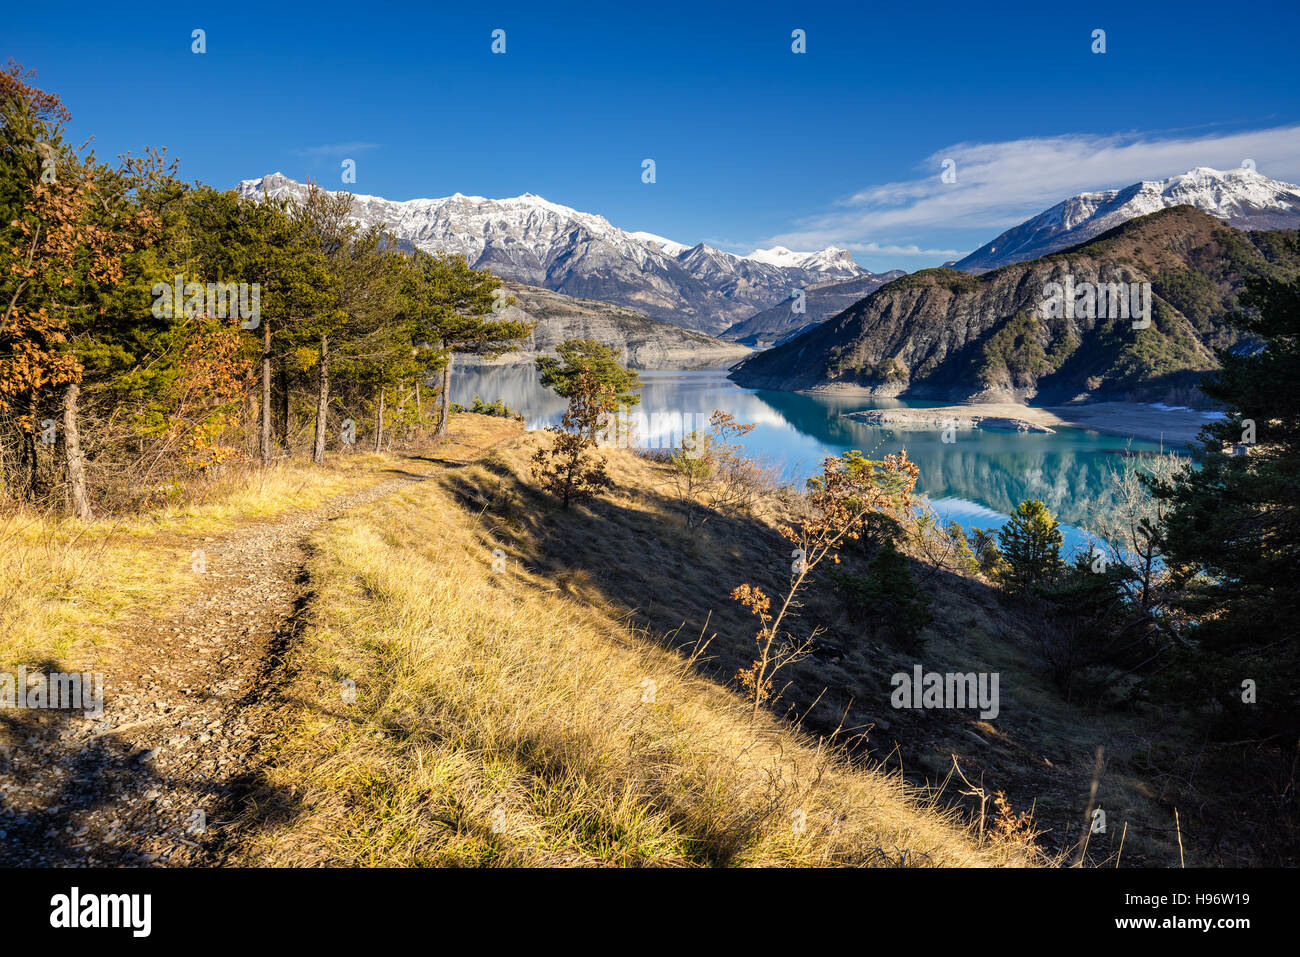 View from hiking trail of Serre Poncon Lake in Winter with snow covered mountains. Le Rousset, Hautes Alpes, Alps, France Stock Photo